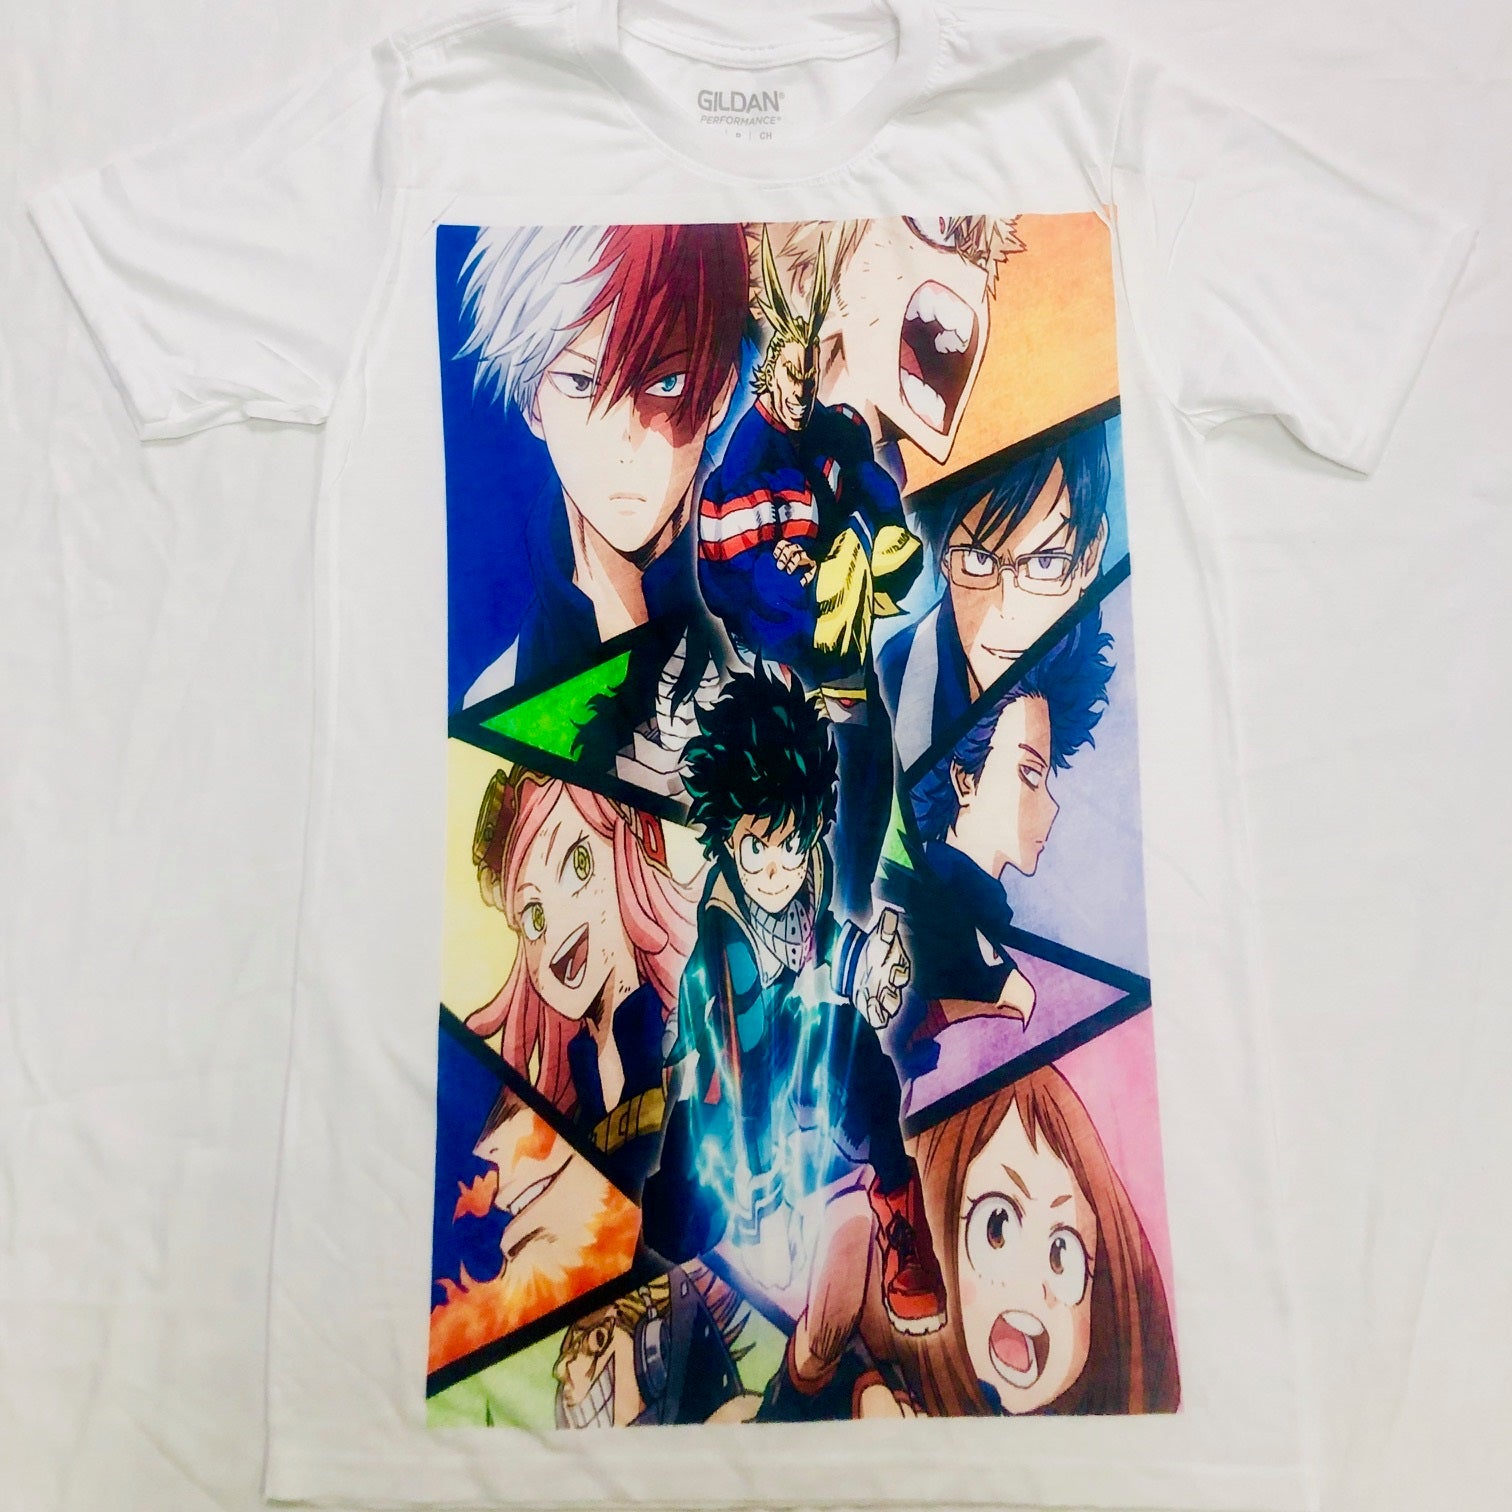 Anime My Hero Academia T-Shirt - Super Anime Store FREE SHIPPING FAST SHIPPING USA